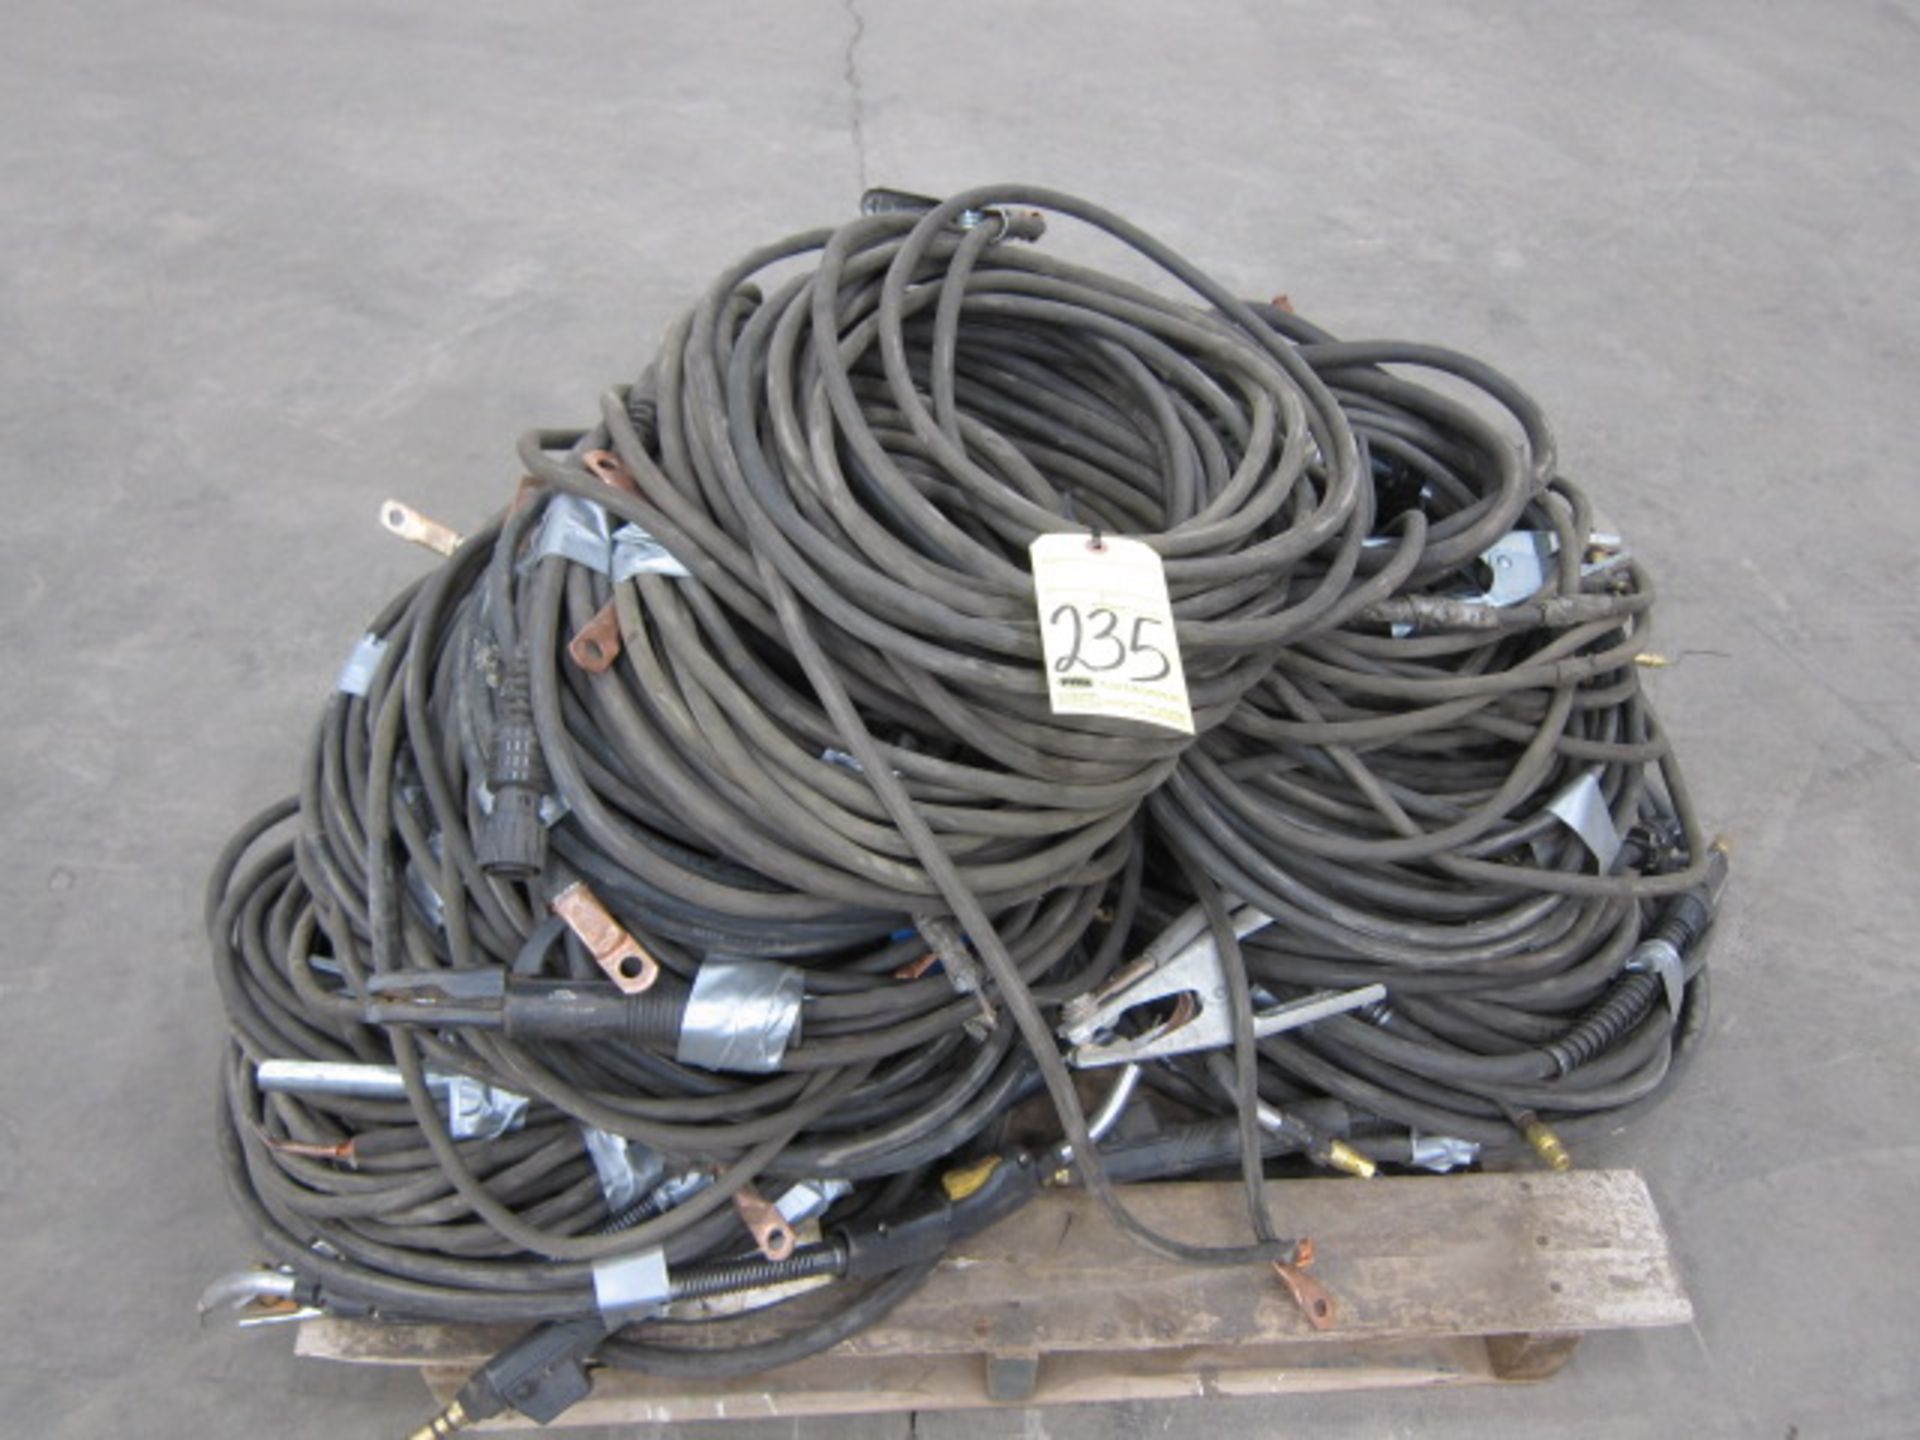 LOT CONSISTING OF:  MIG guns & welding leads (on one skid)